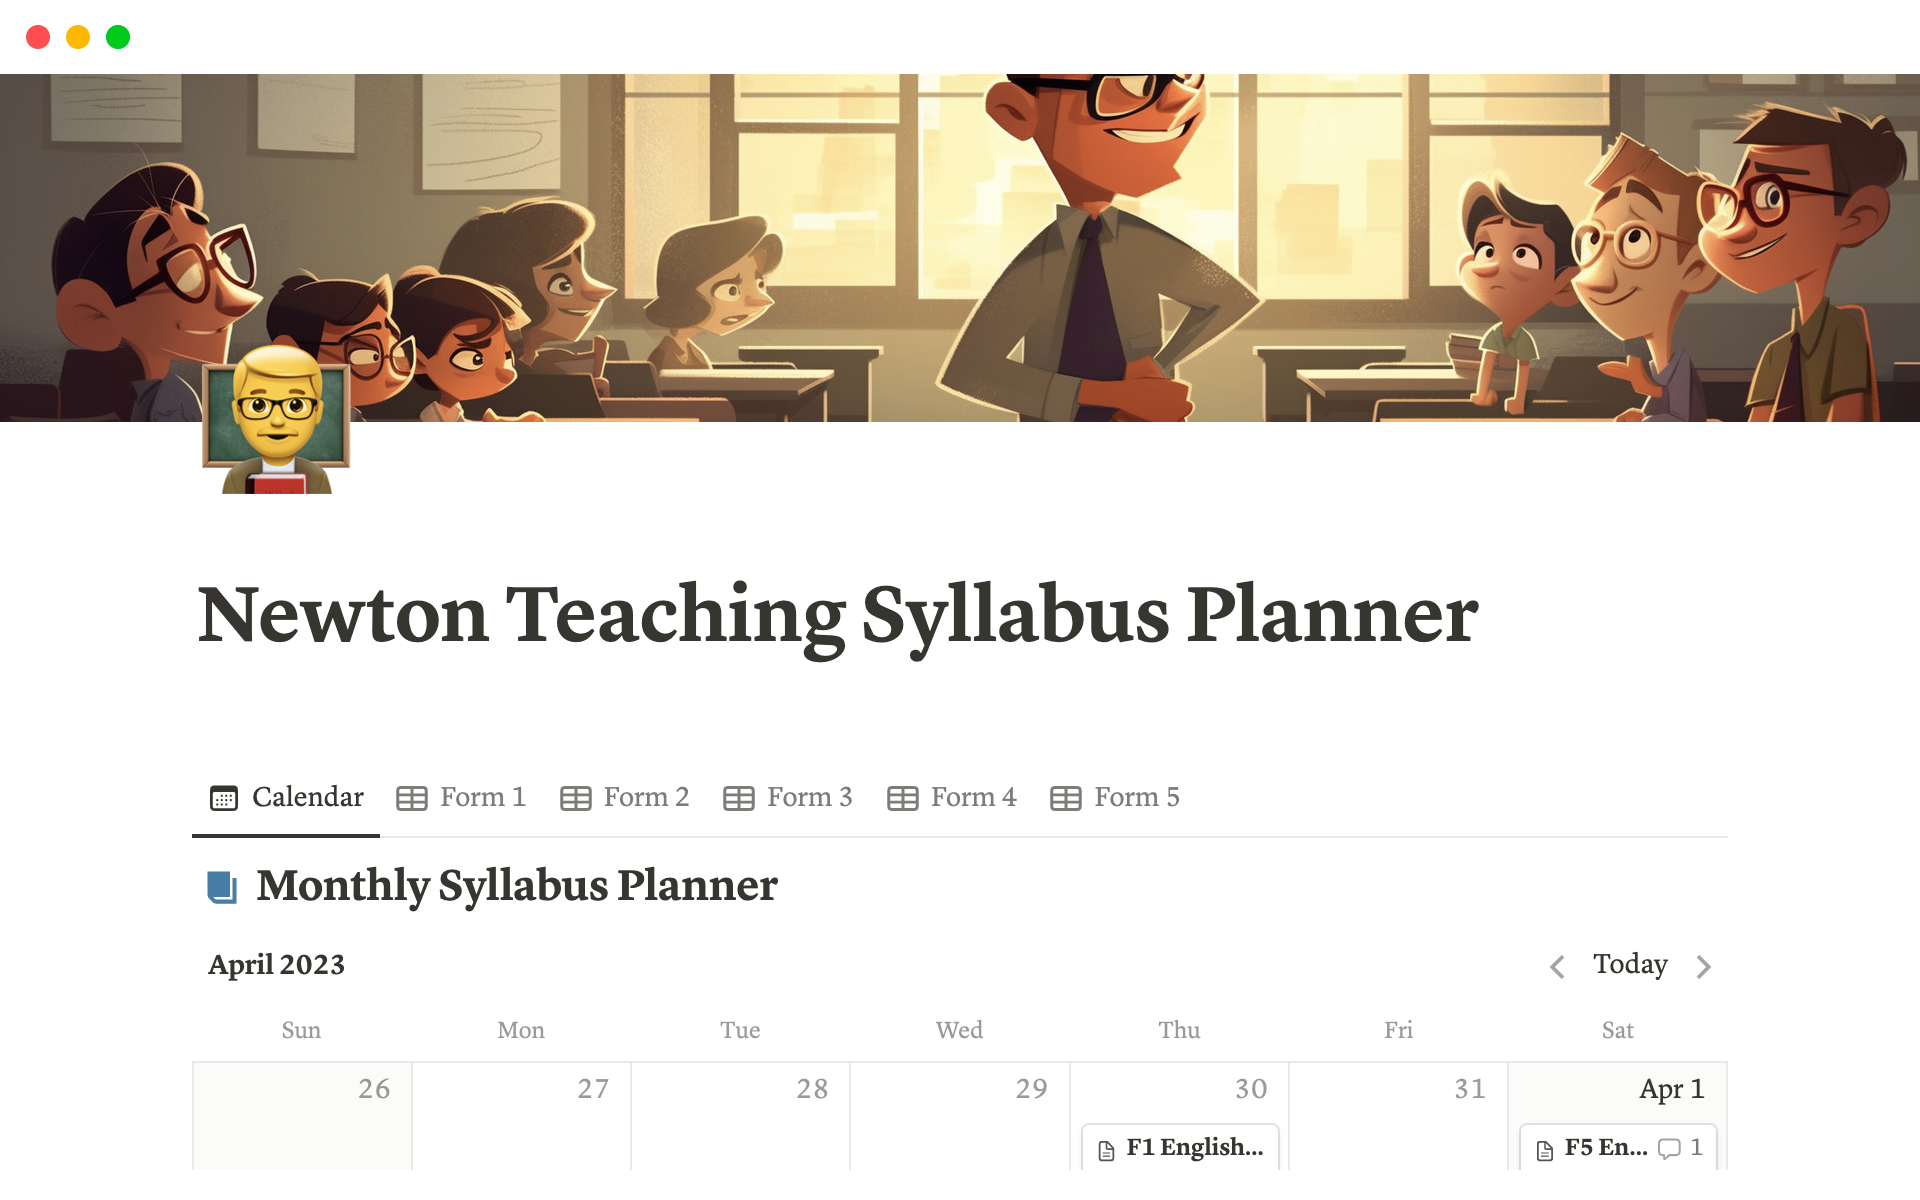 This template allows you to organise your teaching syllabus in a calendar view and also tables view.